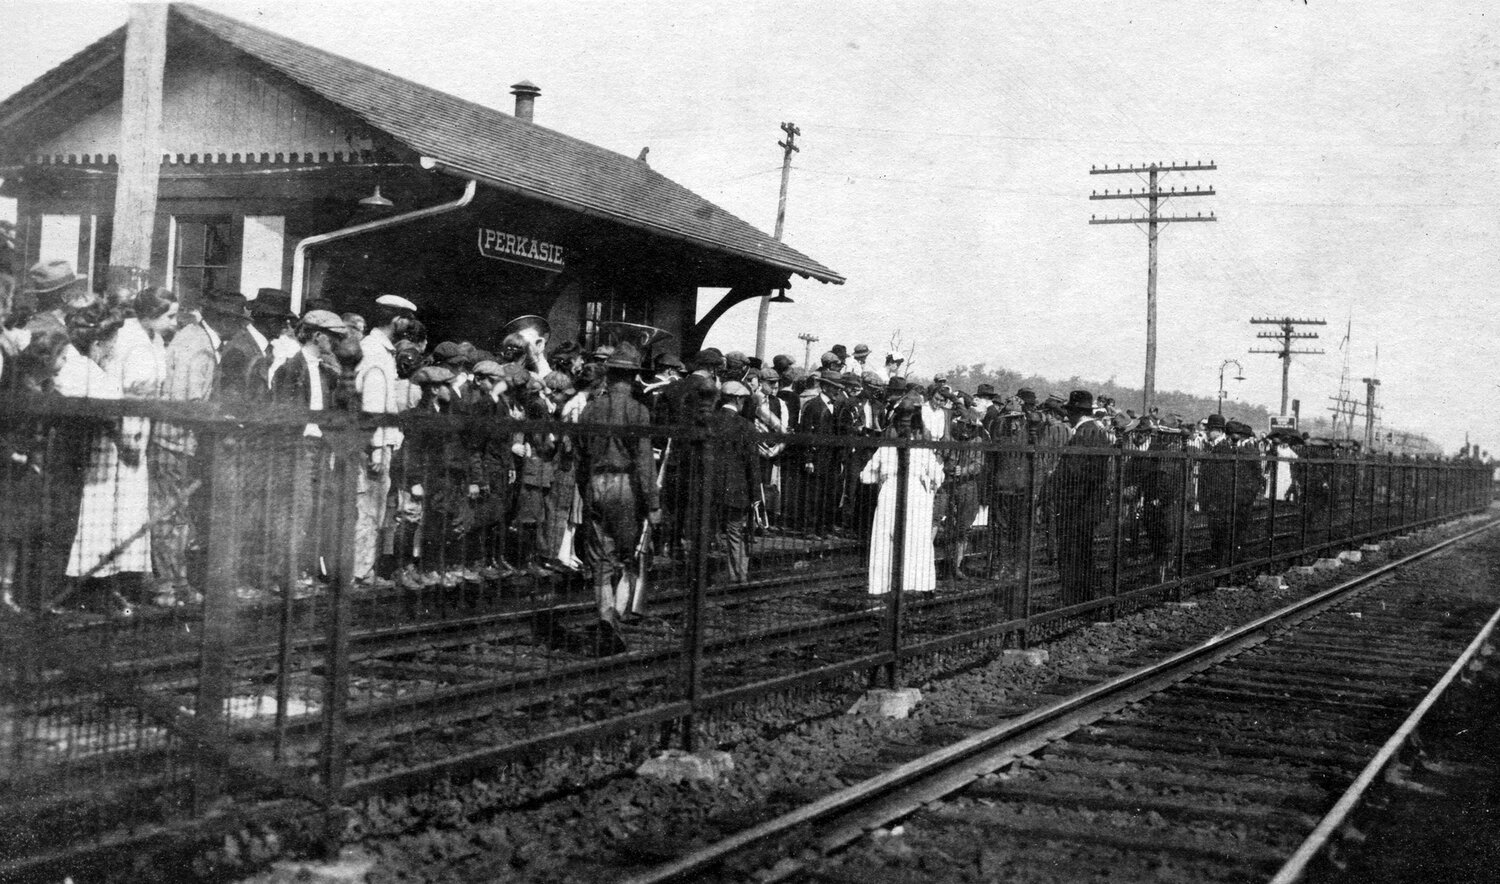 Riders await the arrival of a train in 1918 at the Perkasie station.